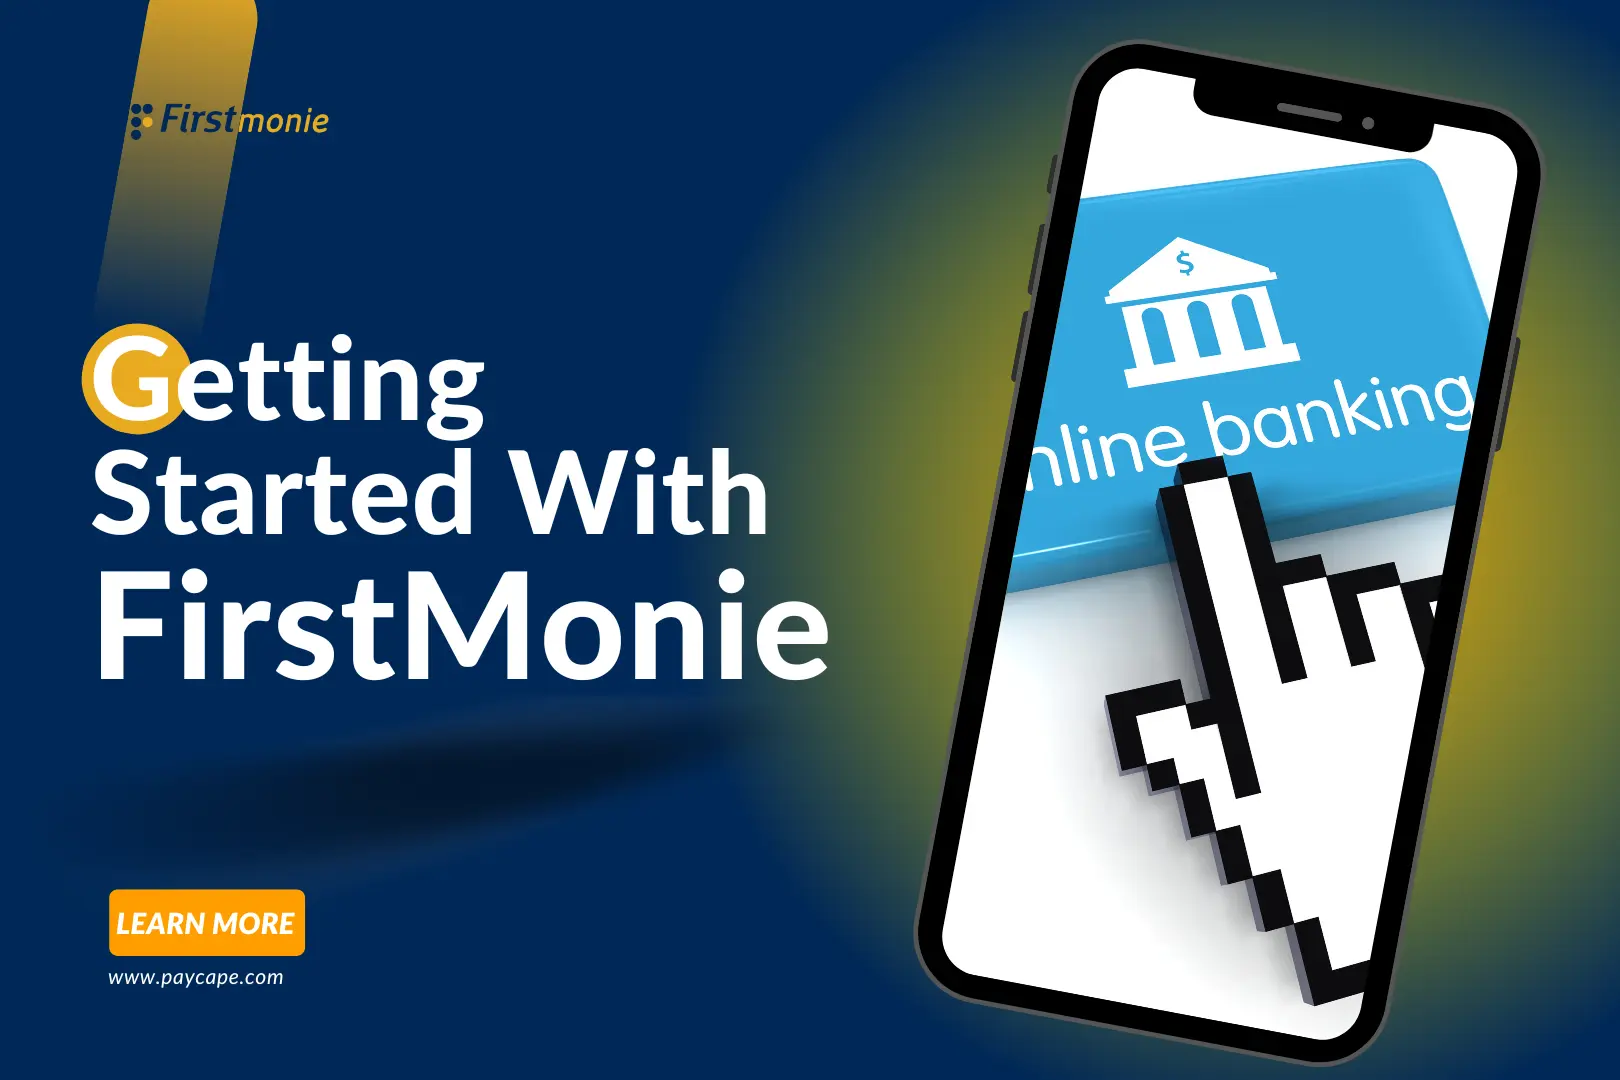 Getting Started with FirstMonie